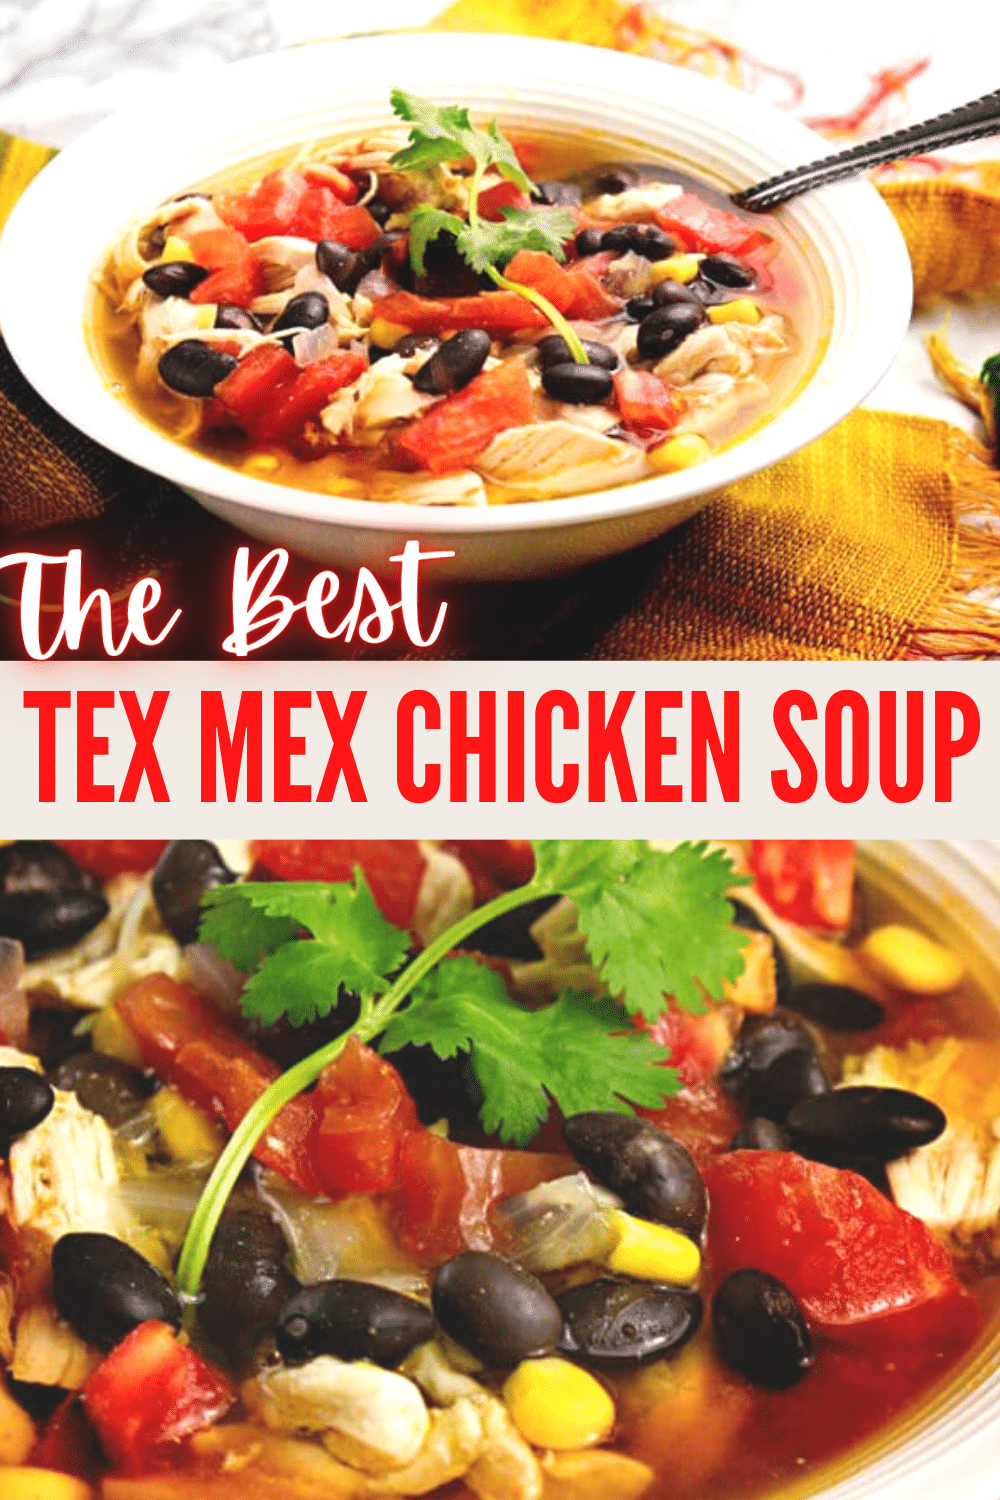 If you like Tex Mex flavors you are going to love this soup! It's full of your favorite flavors that are made even better with a secret ingredient. #texmex #soup #recipes via @wondermomwannab